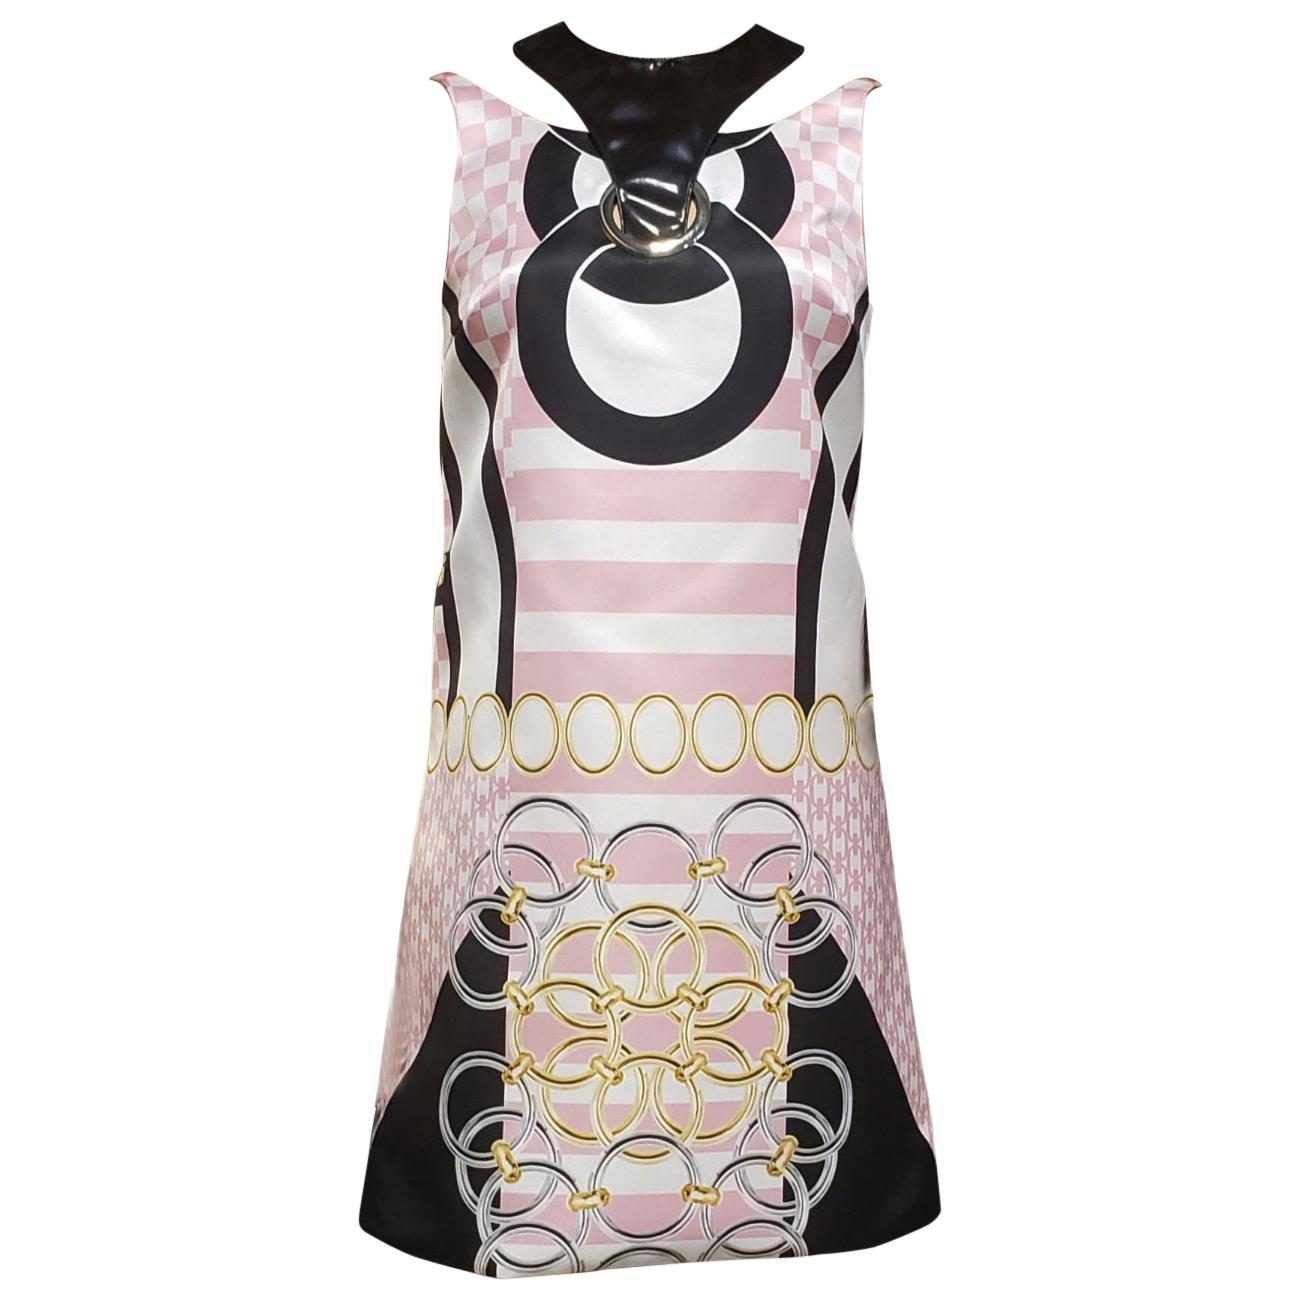 S/2015 look #13 NEW VERSACE PINK MINI DRESS W/ PATENT LEATHER DETAIL 38 - 4